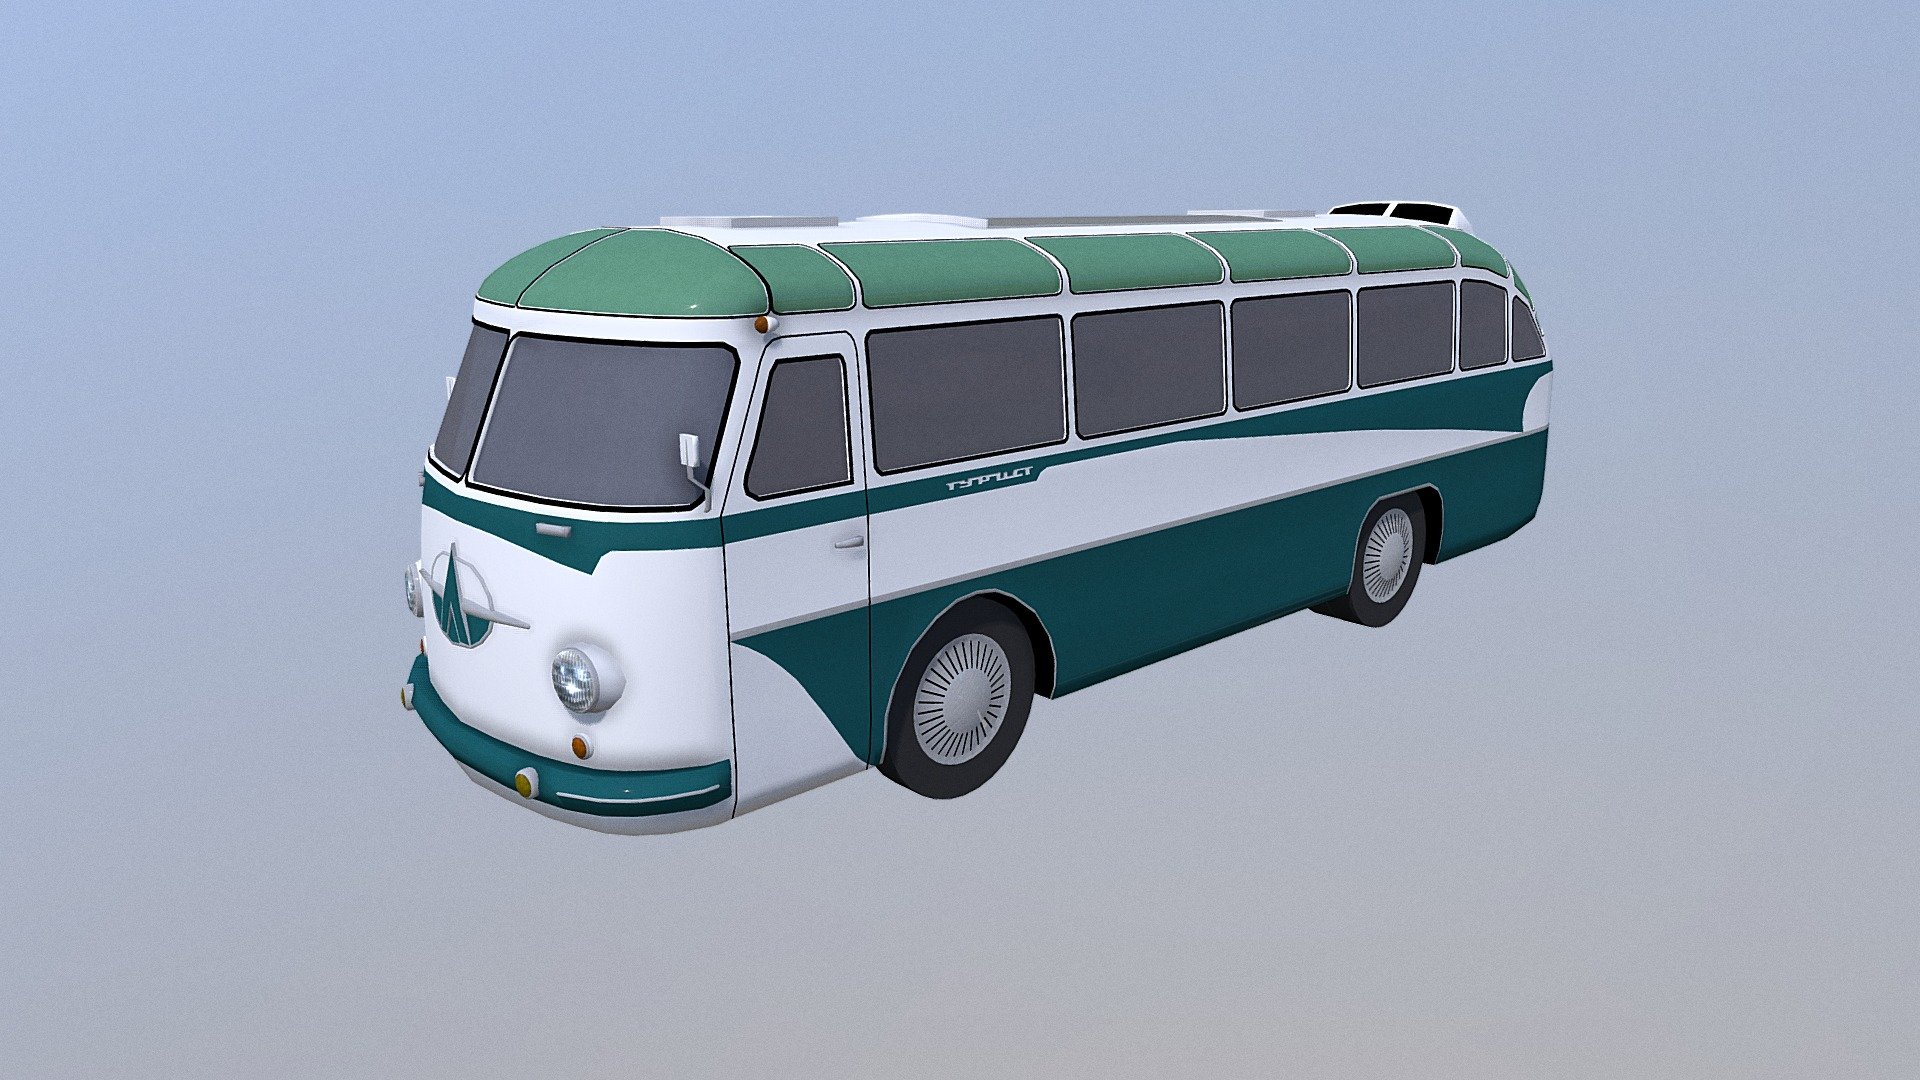 Asset for Cities Skylines. LAZ-697 “Tourist” was developed at the plant LAZ in Lviv in 1959-1963. Soviet tourist bus of middle class - The Soviet model LAZ-697 "Tourist" of 1959-1963 - 3D model by cr_monroe (@cr.monroe) 3d model